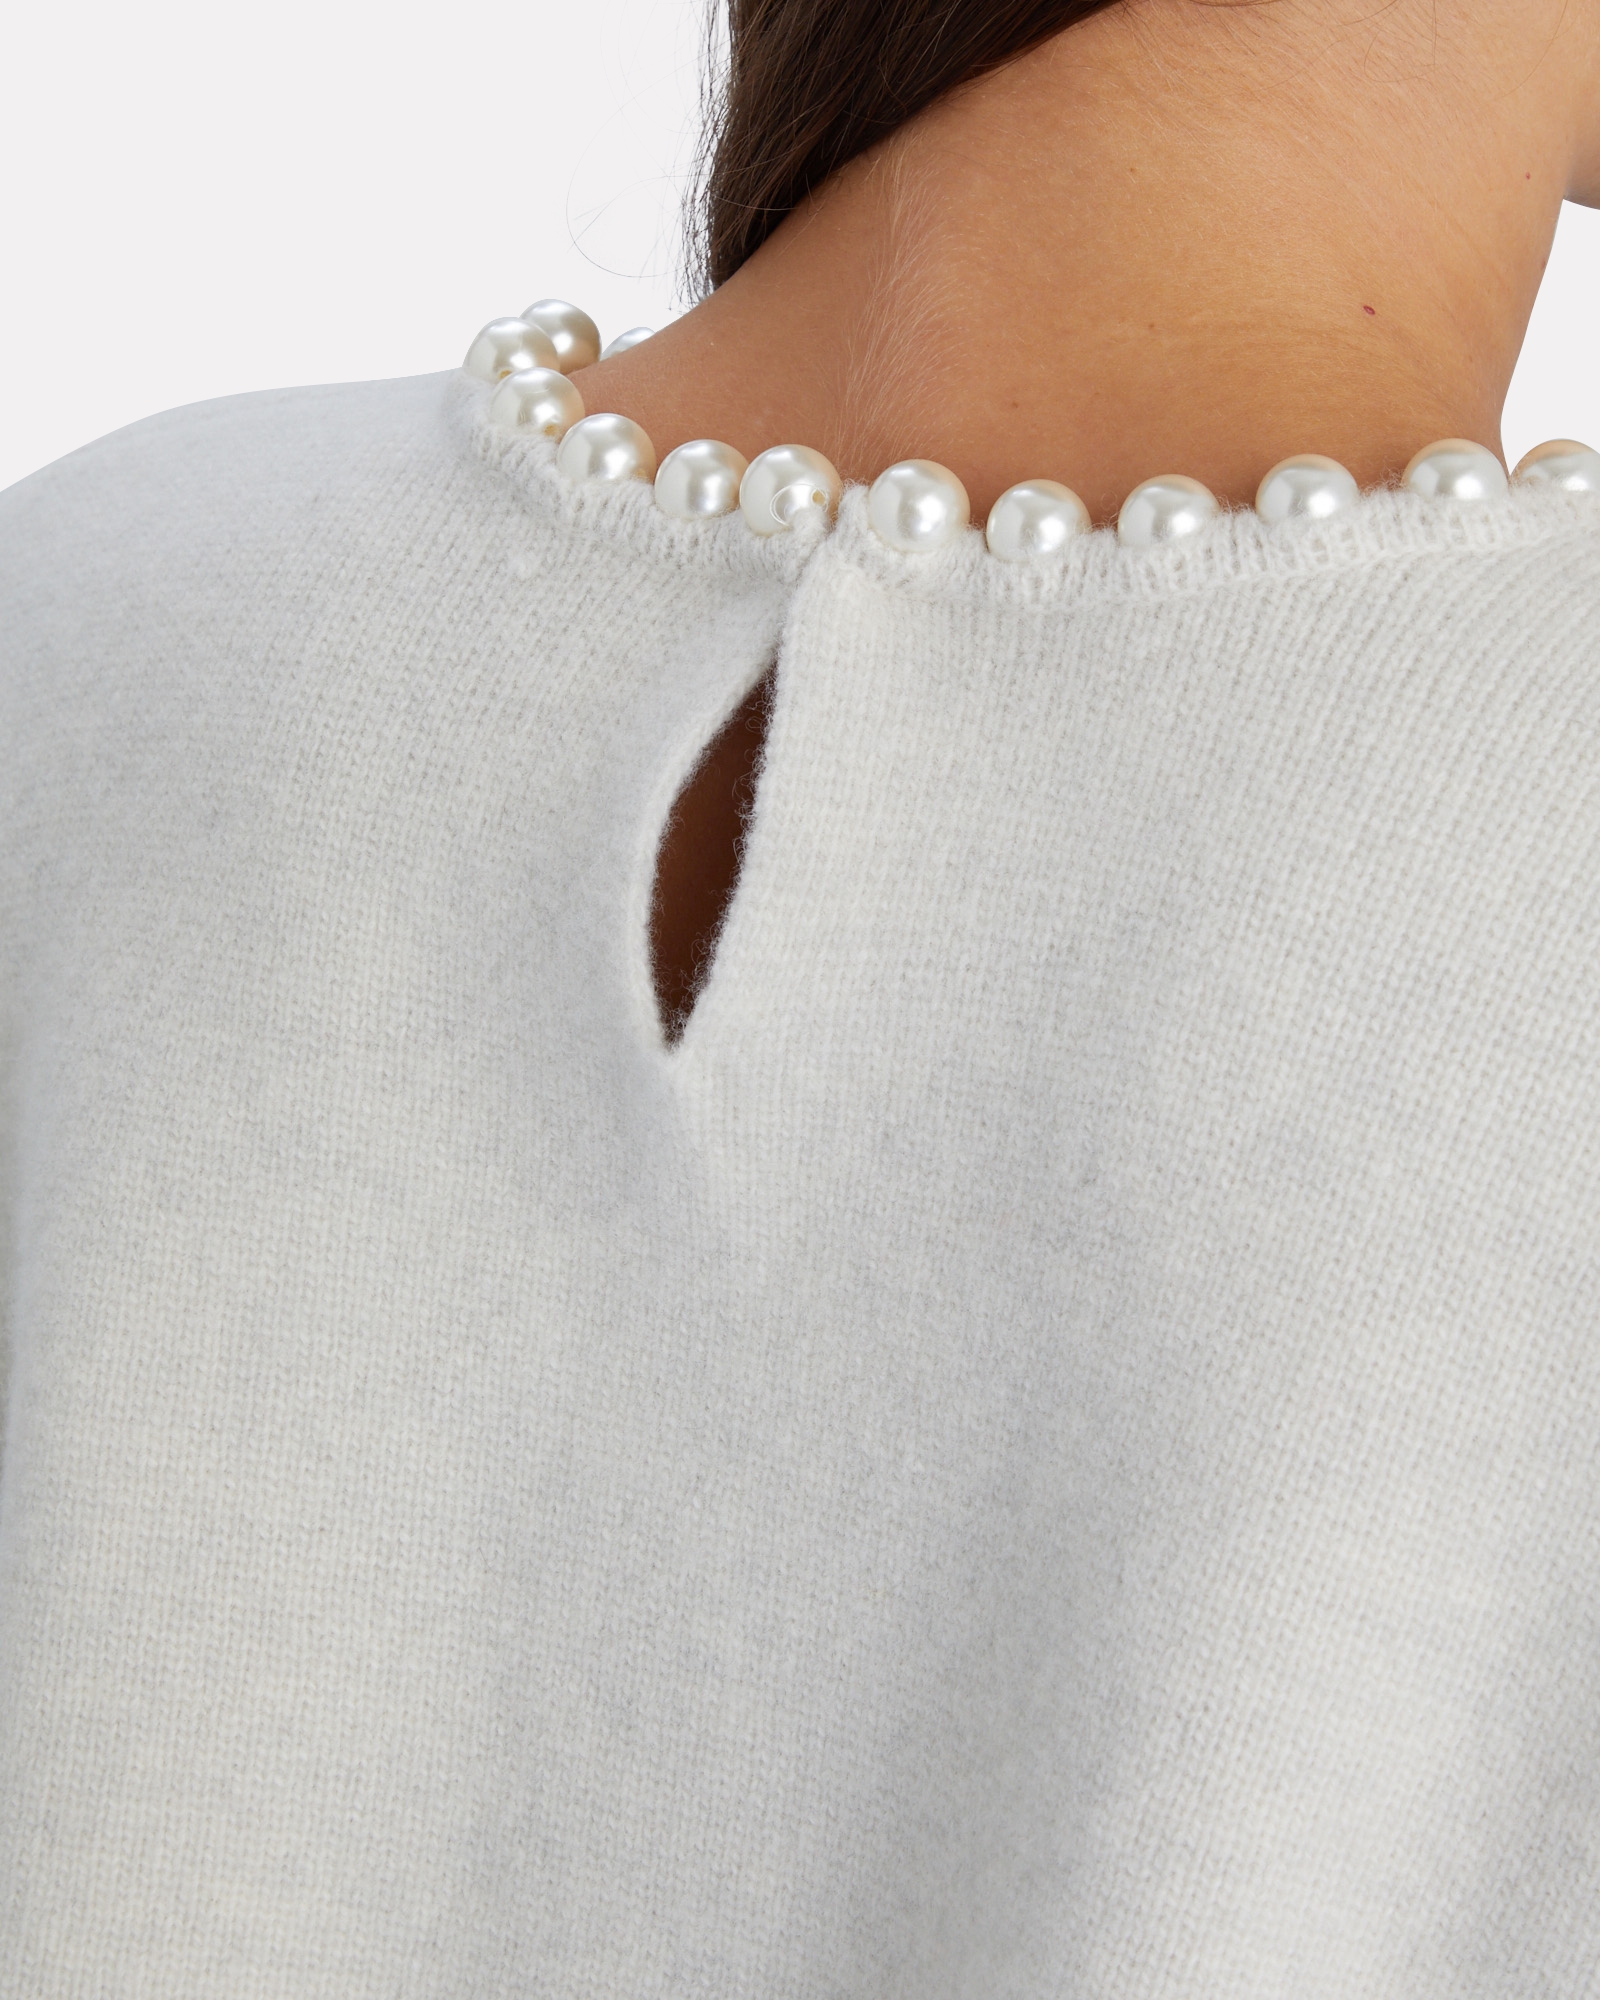 Alexander Wang Pearl Necklace Wool-Cashmere Sweater | INTERMIX®